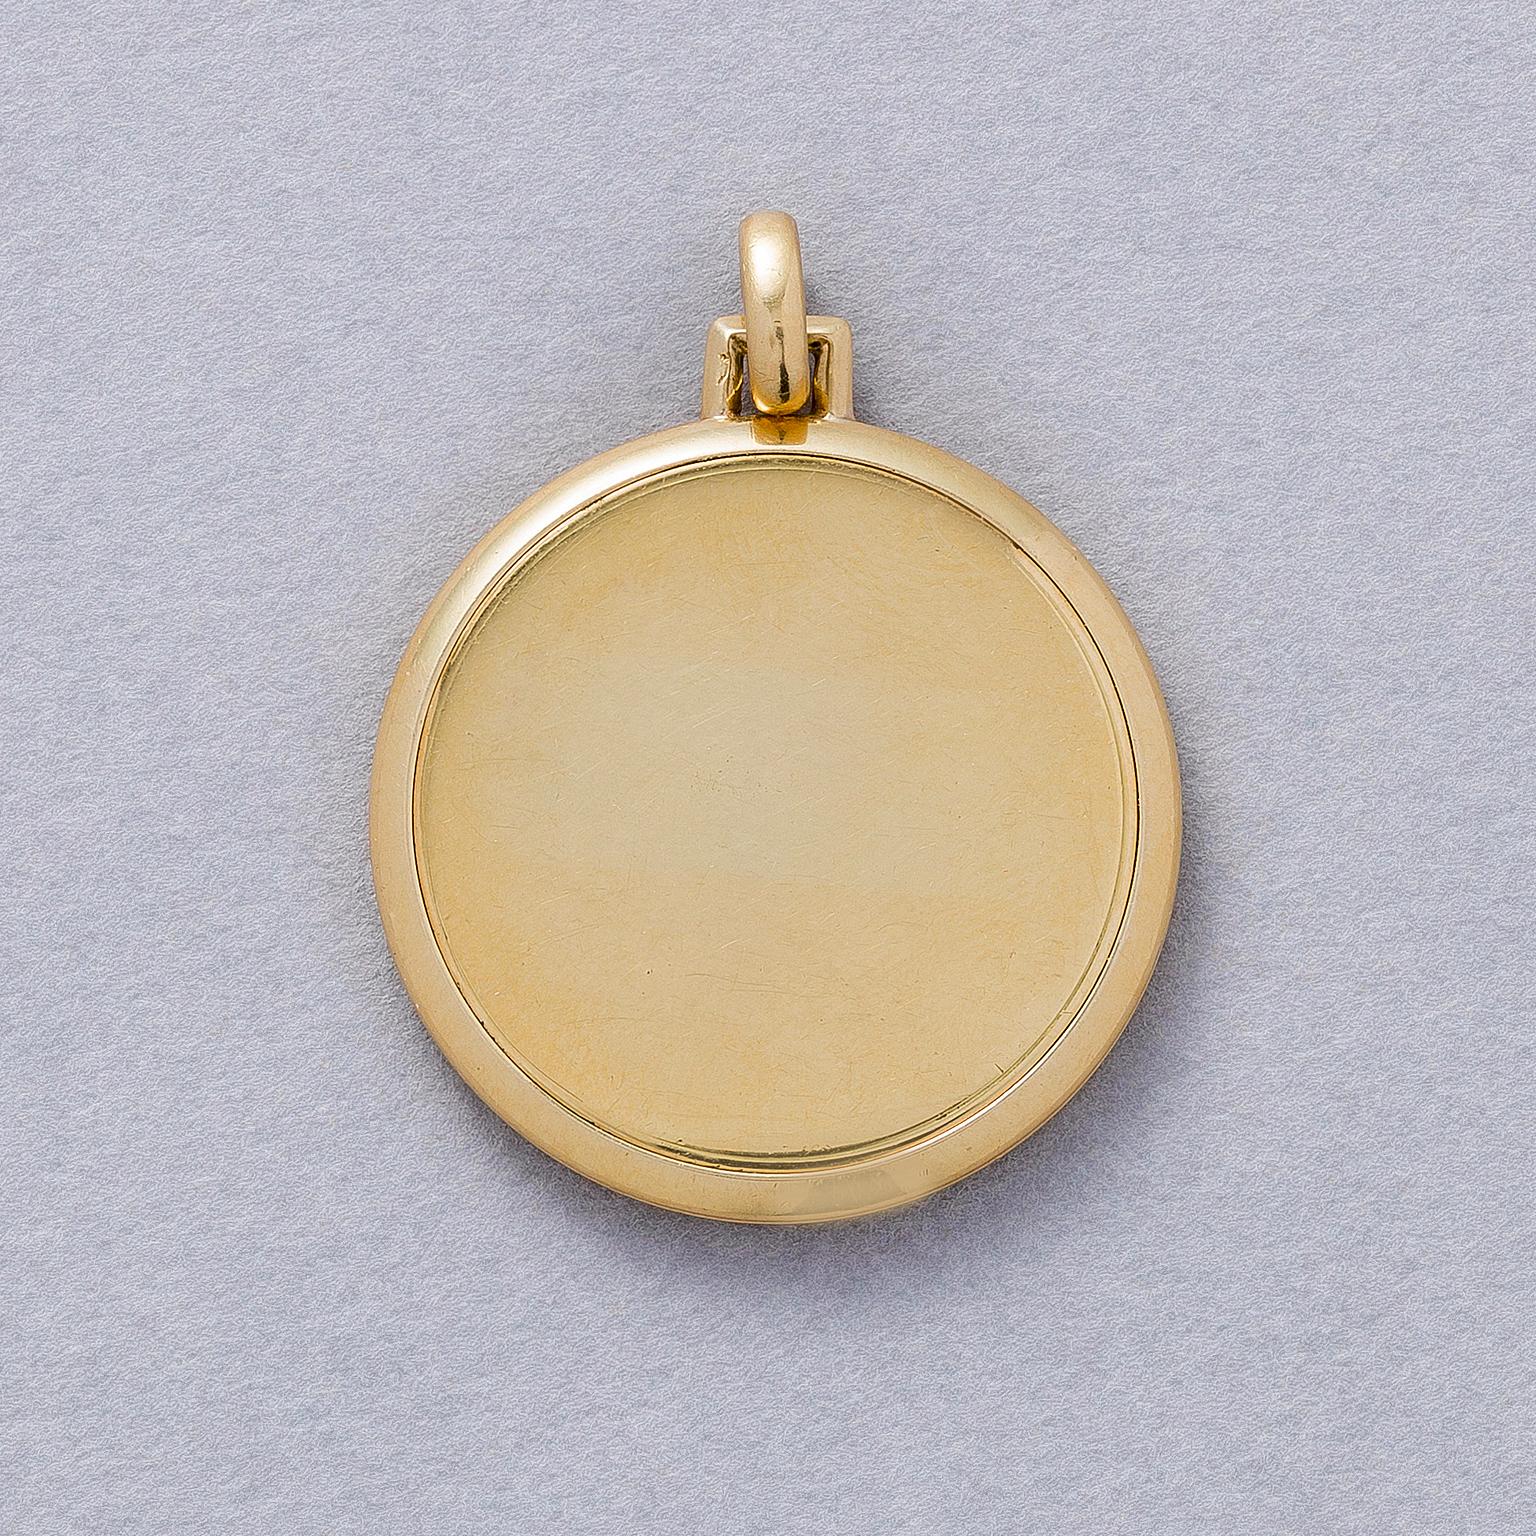 An 18 carat gold locket with a hiddden opening, when you turn the inside you can click open the locket to reveal two compartments , numbered and marked, France circa 1900.

weight: 15.88 grams
size: 3.5 x 2.7 cm
